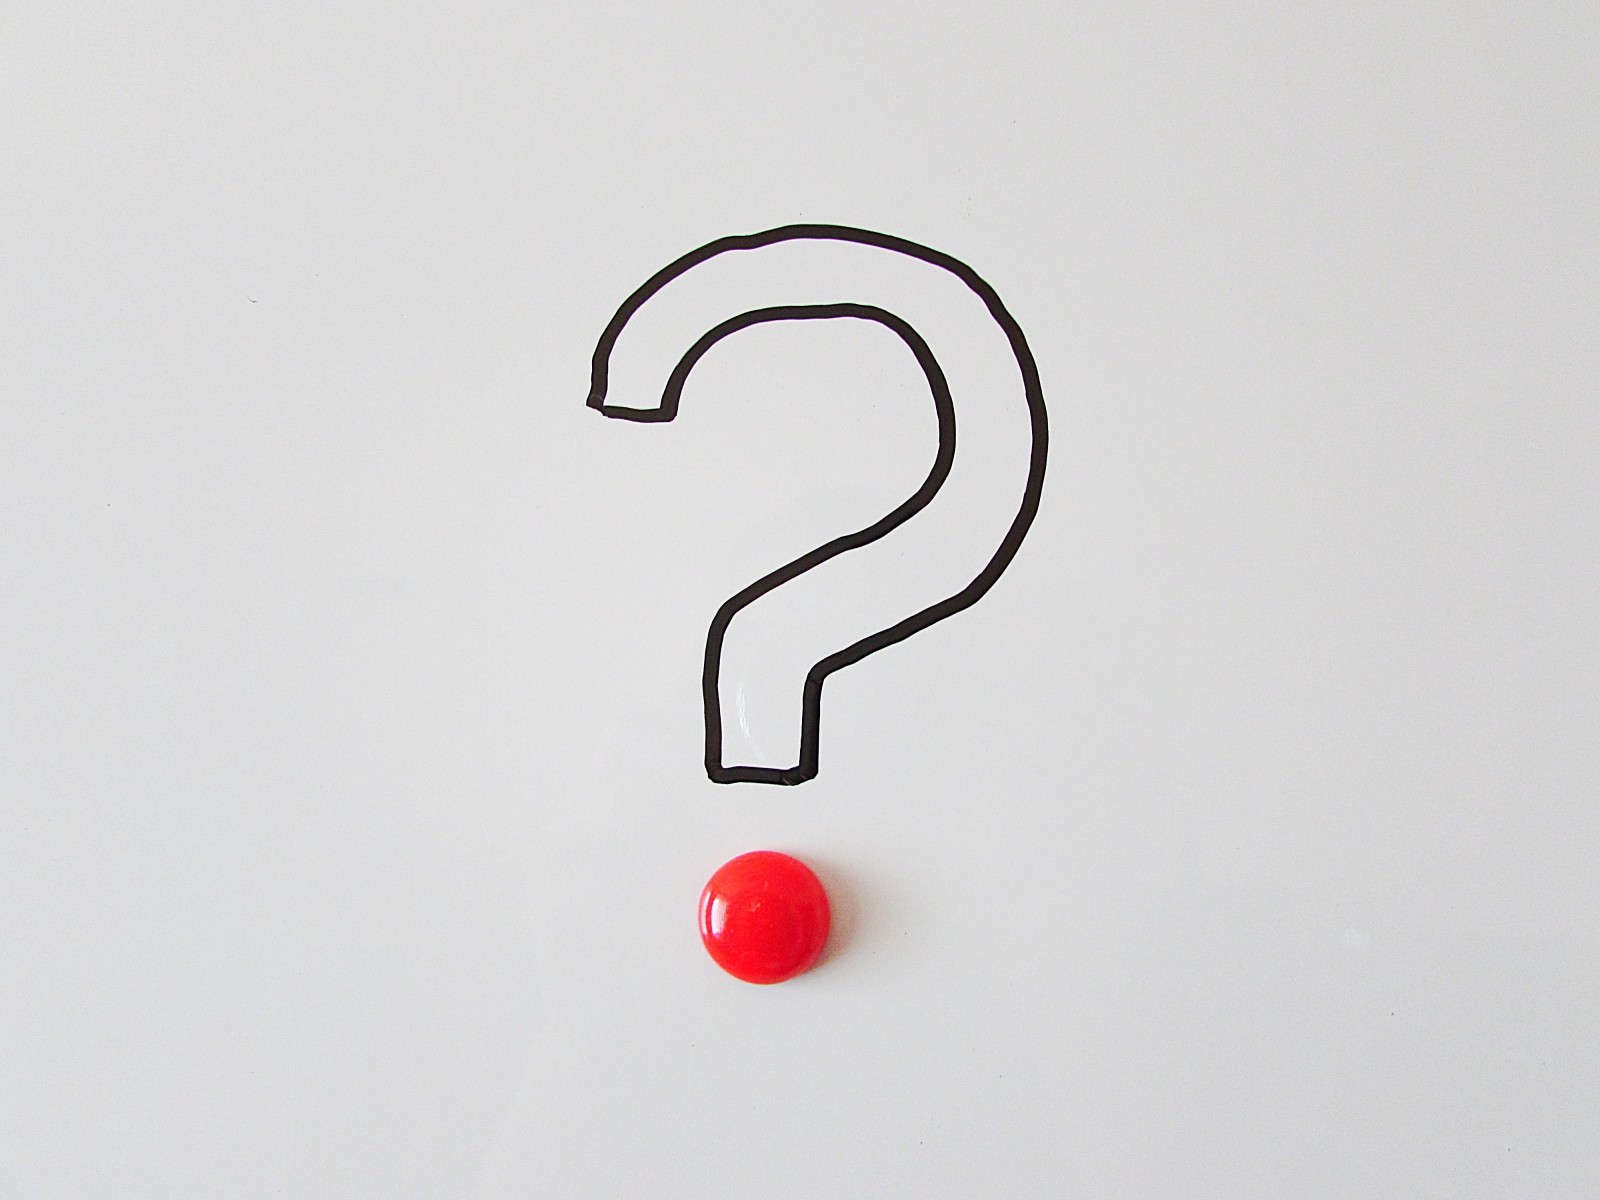 Net Promoter Score Questions To Ask